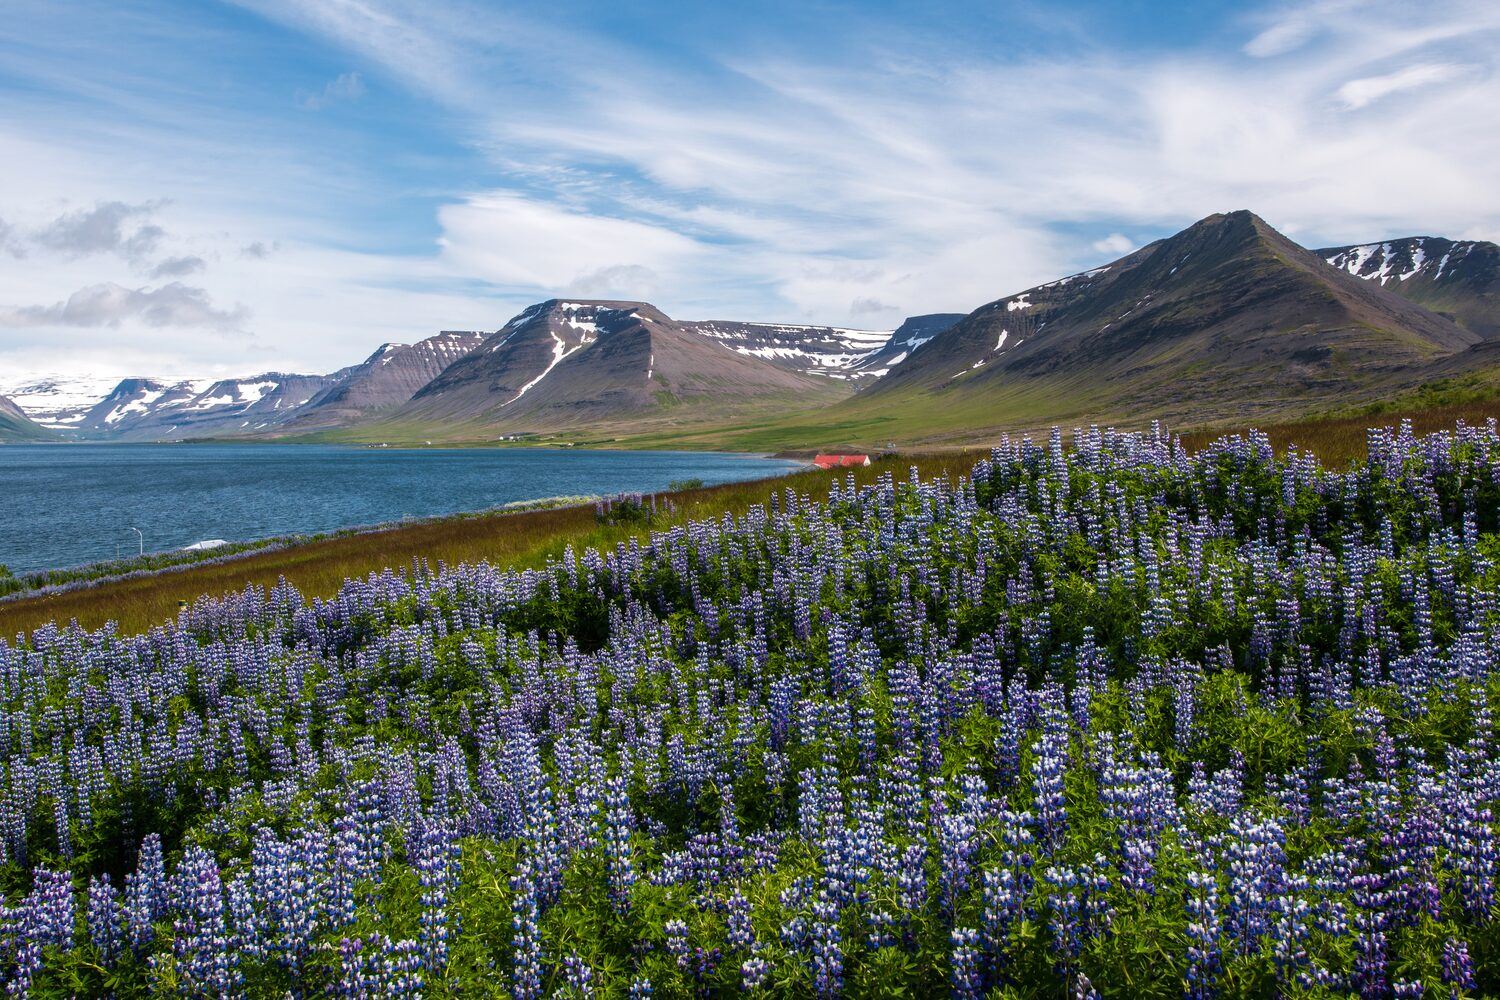 Field of purple flowers all bloomed, with snow covered mountains in background, in Westfjords, Iceland.